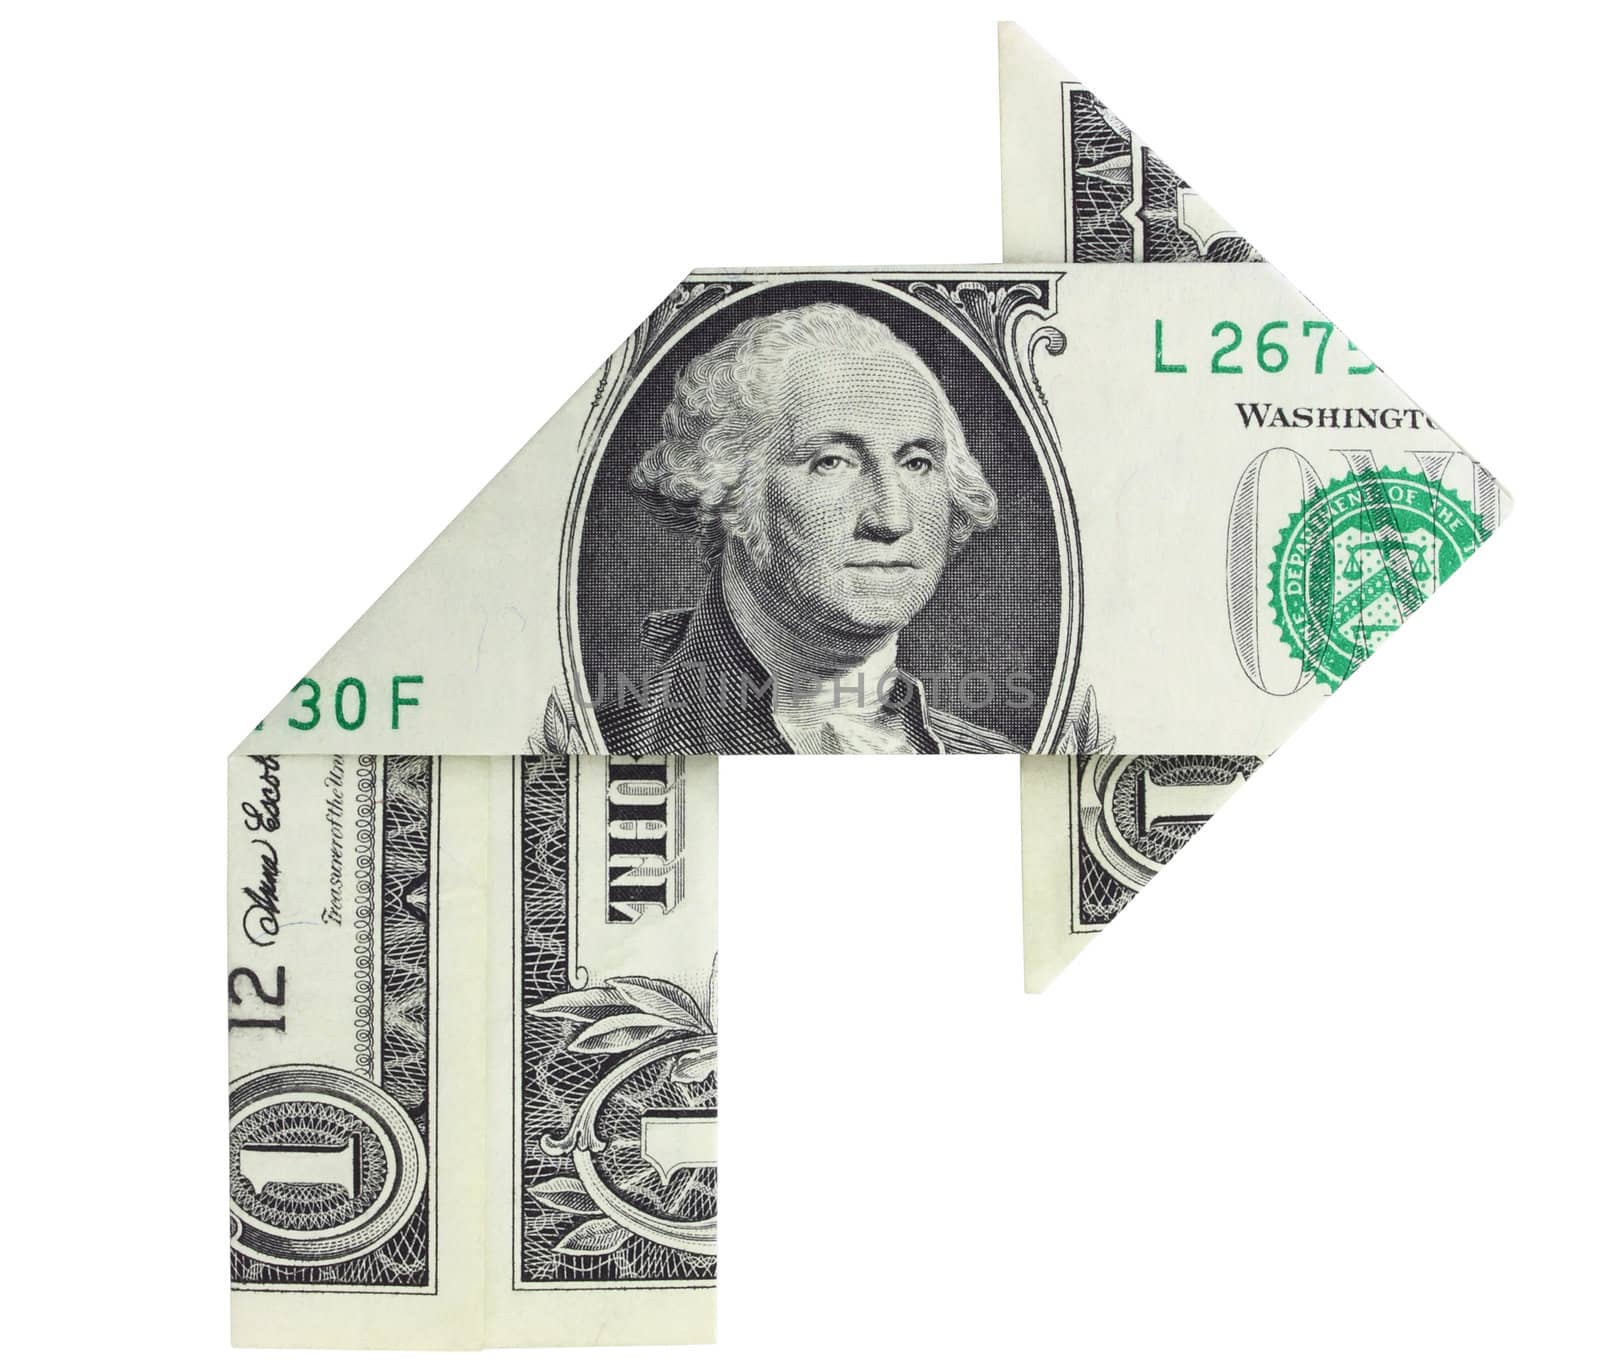 Dollar bill folded in the shape of a right turn arrow, isolated on a white background.